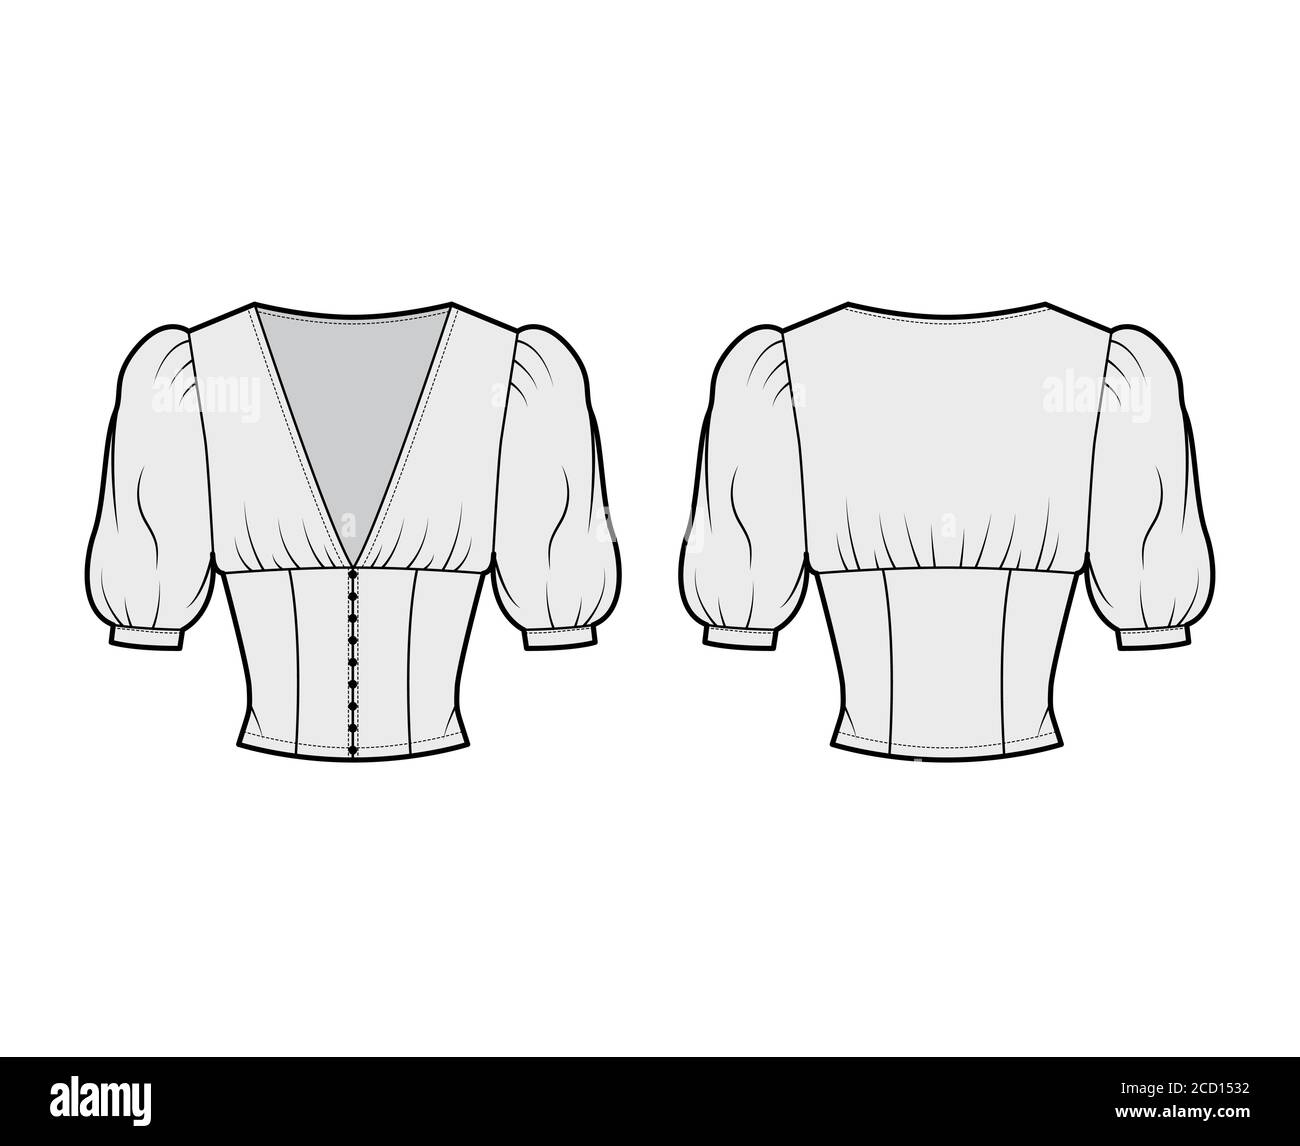 Cropped top technical fashion illustration with short sleeves, puffed shoulders, front button fastenings, fitted body. Flat apparel shirt template front back, grey color. Women men, unisex blouse CAD Stock Vector